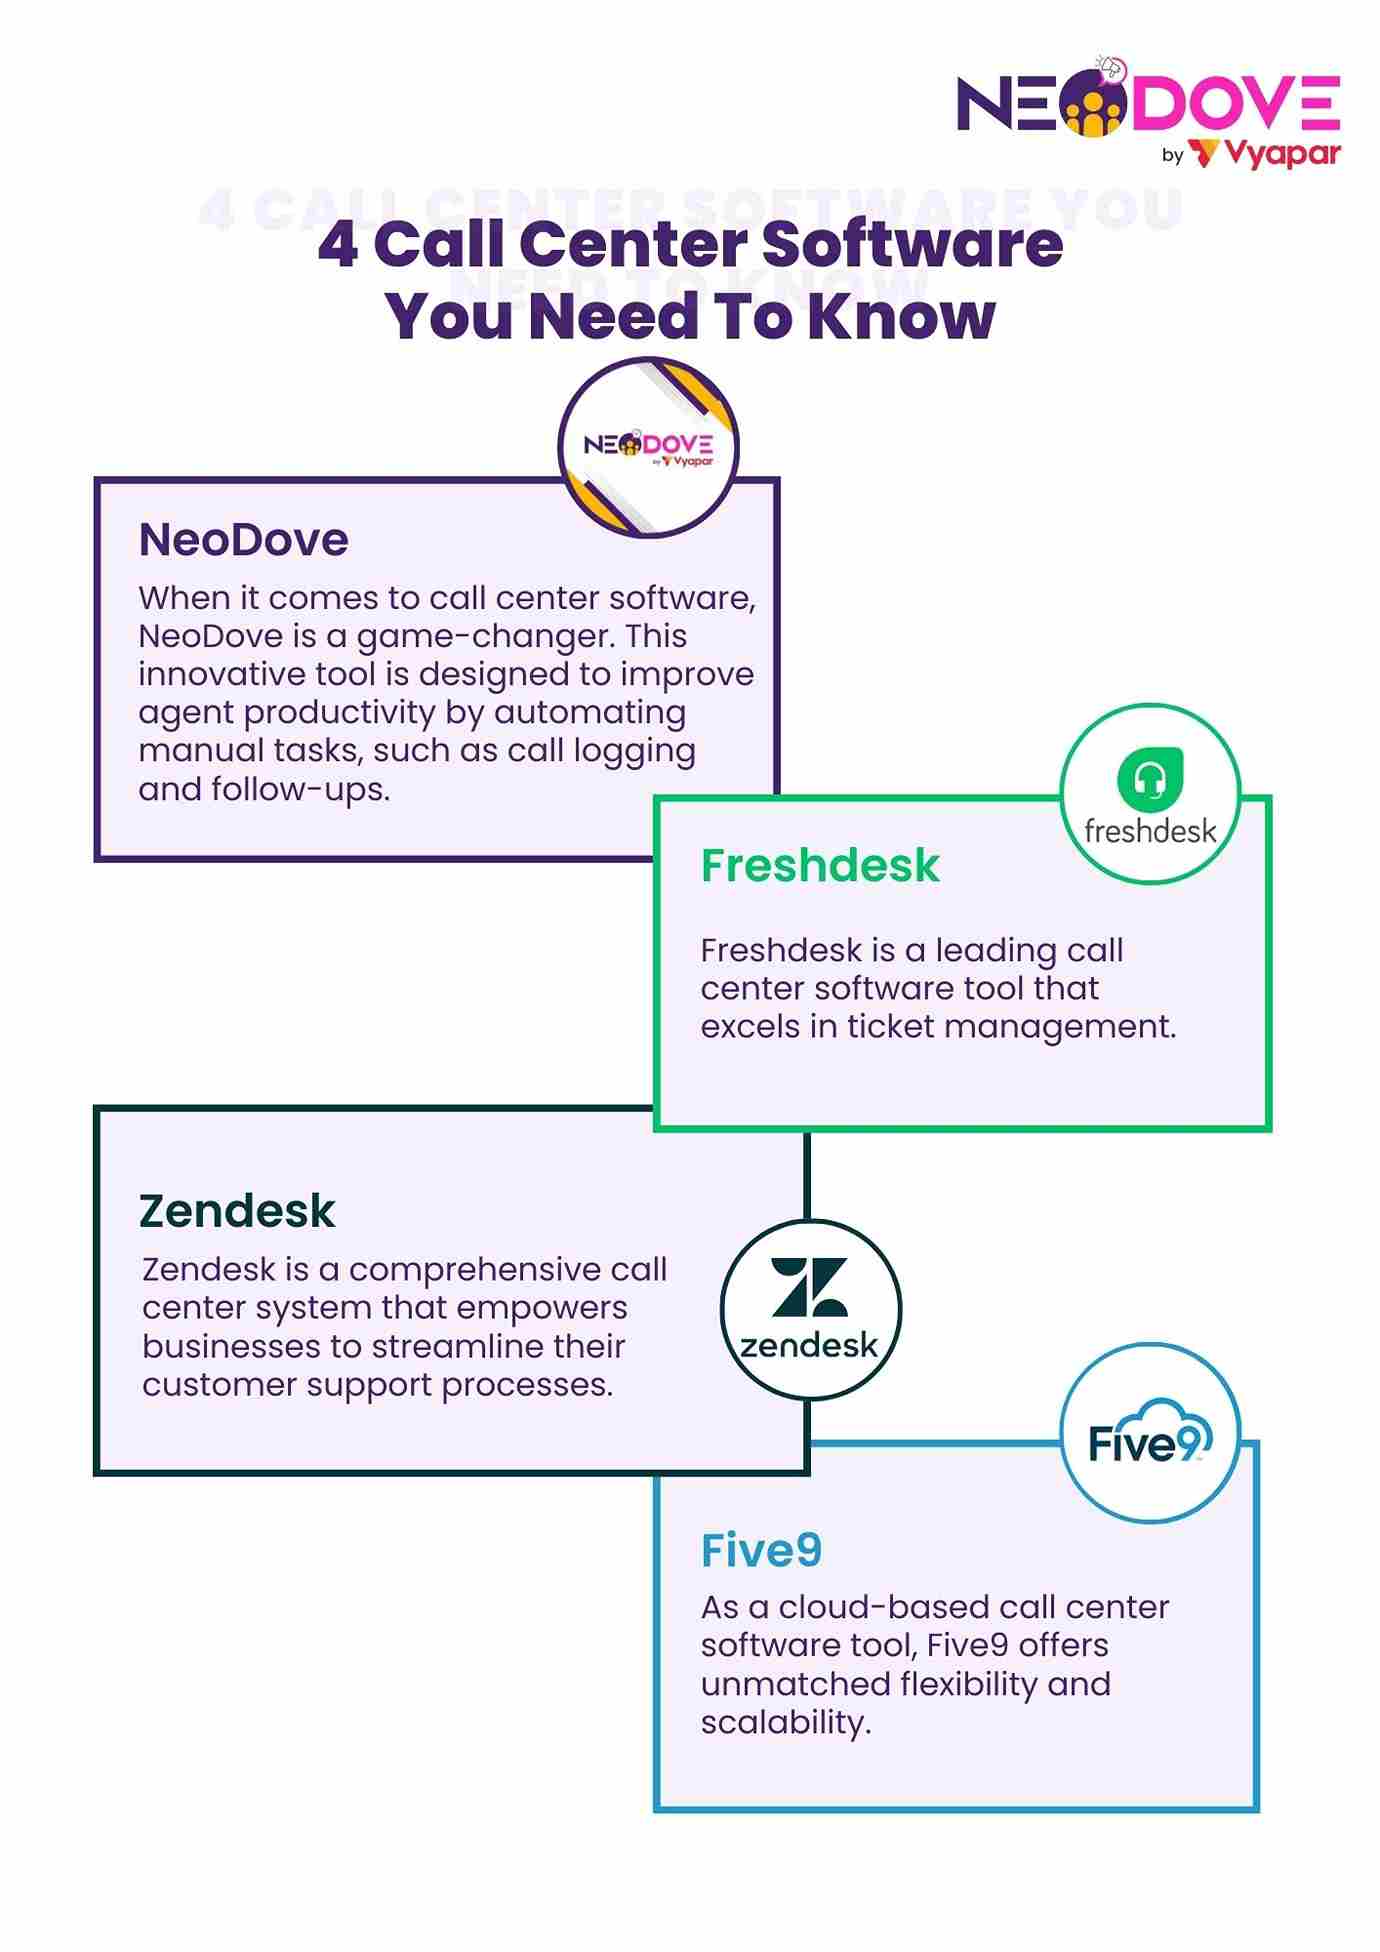 4 Call Center Software You Need To Know - NeoDove